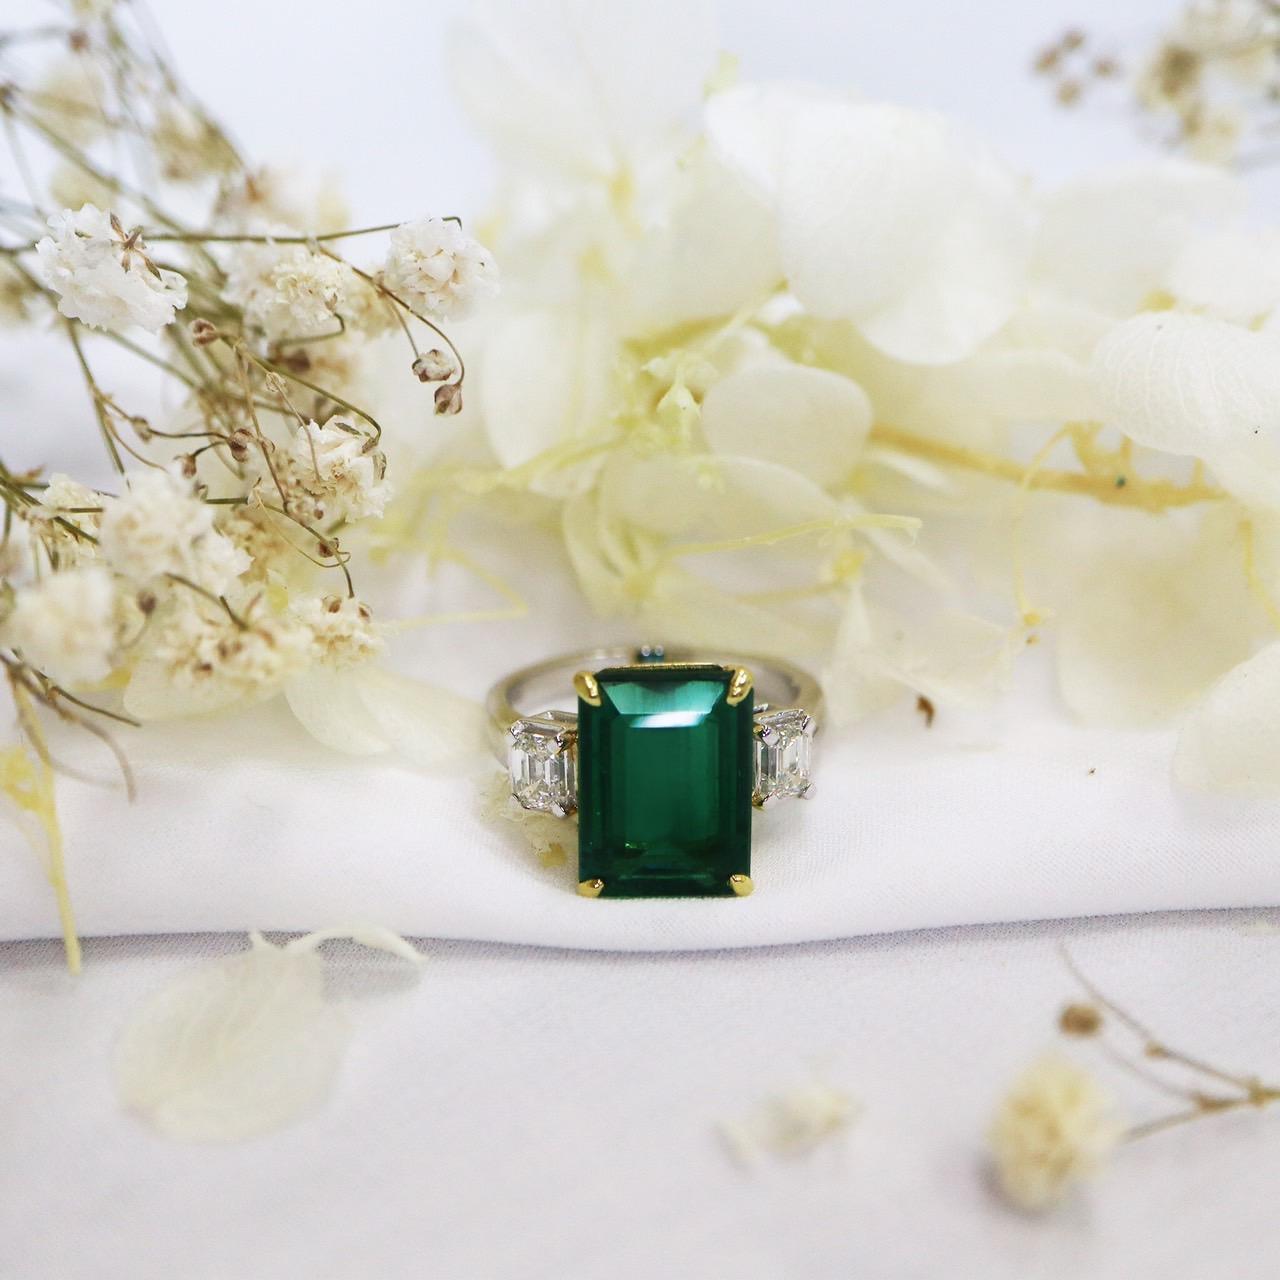 ** GIA-Certified I IF 18K 6.35 Ct Top Zambia Emerald&Diamonds Engagement Ring **
One natural top-quality Zambia emerald weighing 6.35 ct set on the 18K dual color gold with 2 pieces of GIA-Certified I IF emerald cut diamonds weighing 0.81 ct.  

The